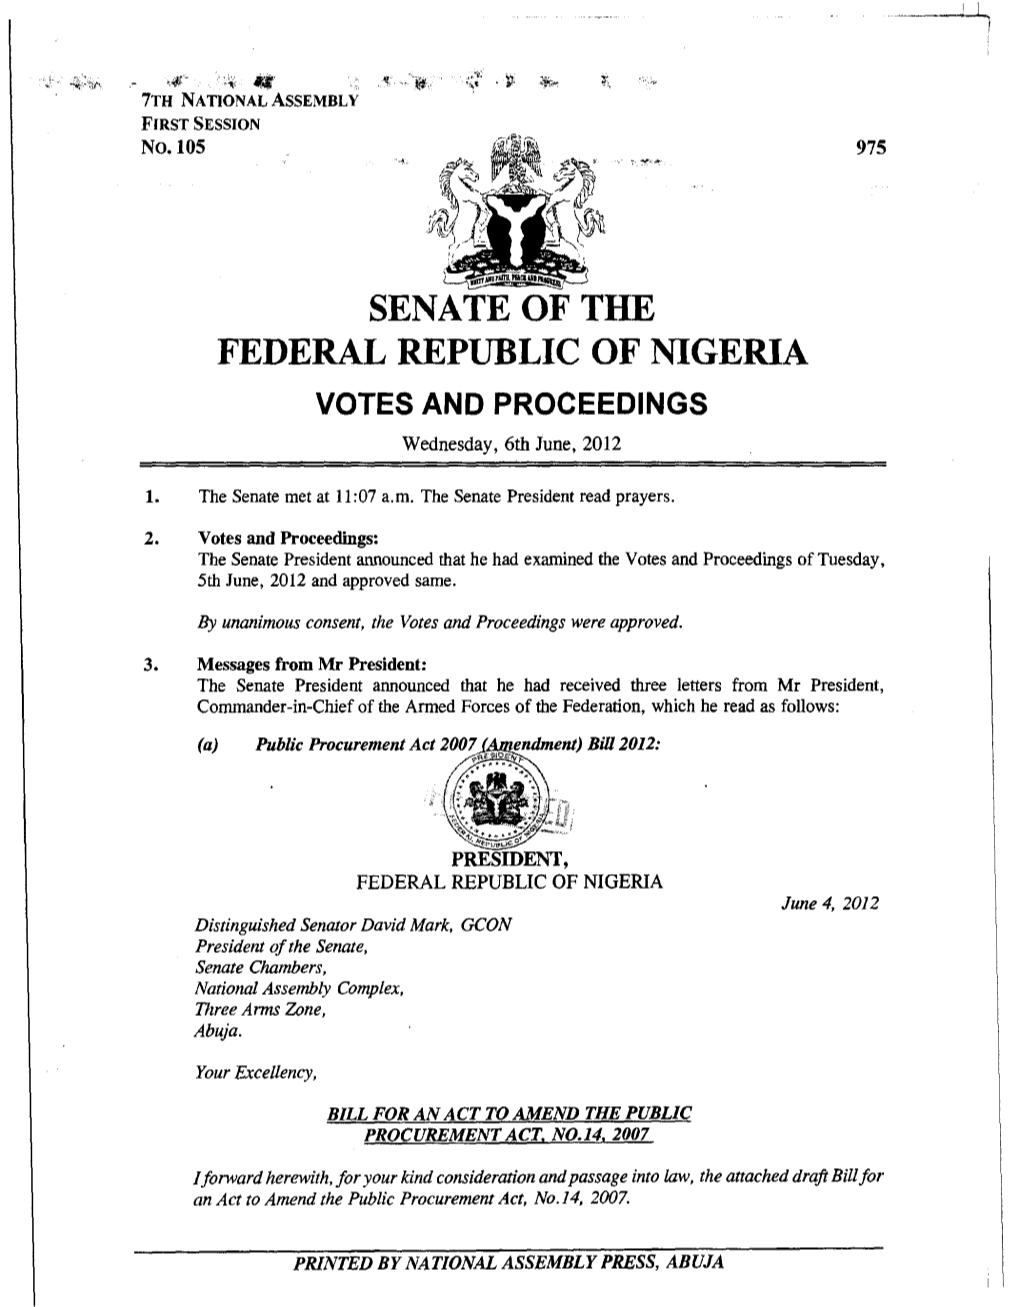 SENATE of the FEDERAL REPUBLIC of NIGERIA VOTES and PROCEEDINGS Wednesday, 6Th June, 2012